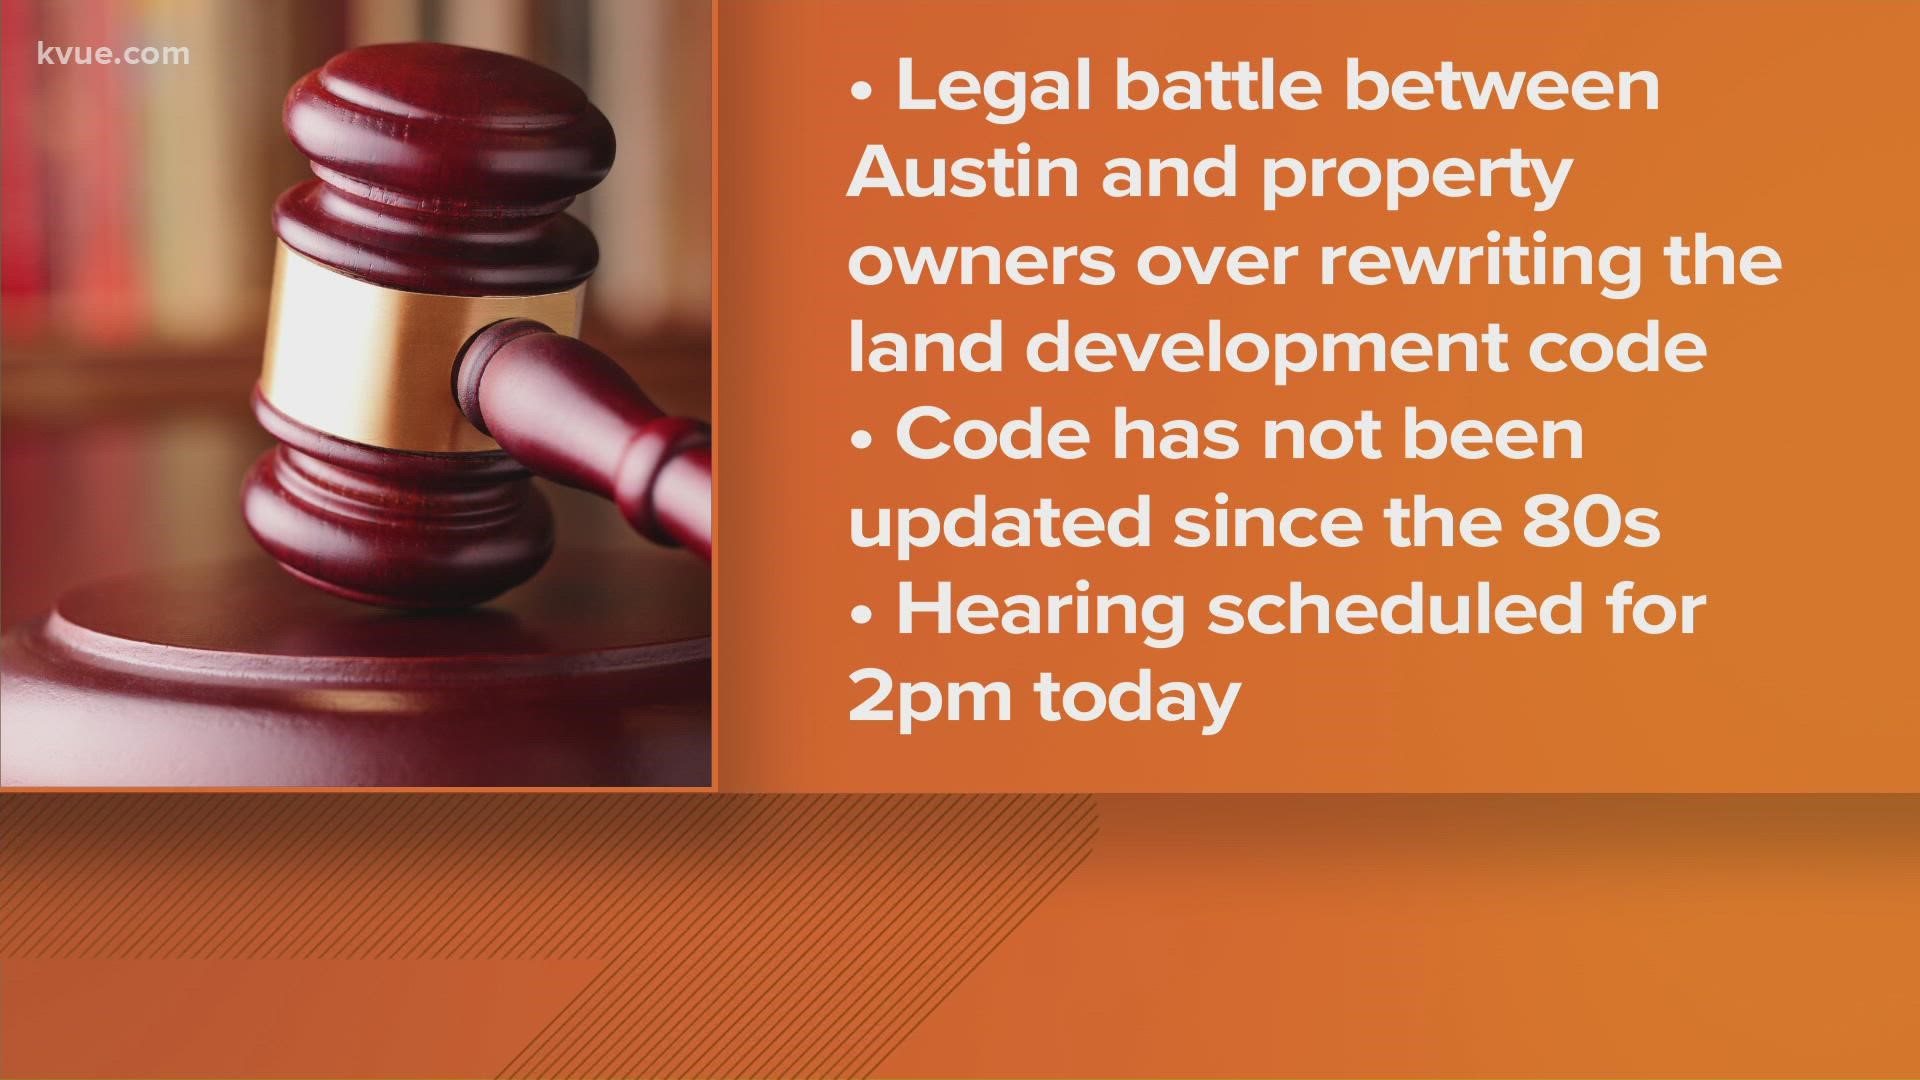 On Wednesday, a Texas court will hear the two sides in a legal battle between the City of Austin and property owners.